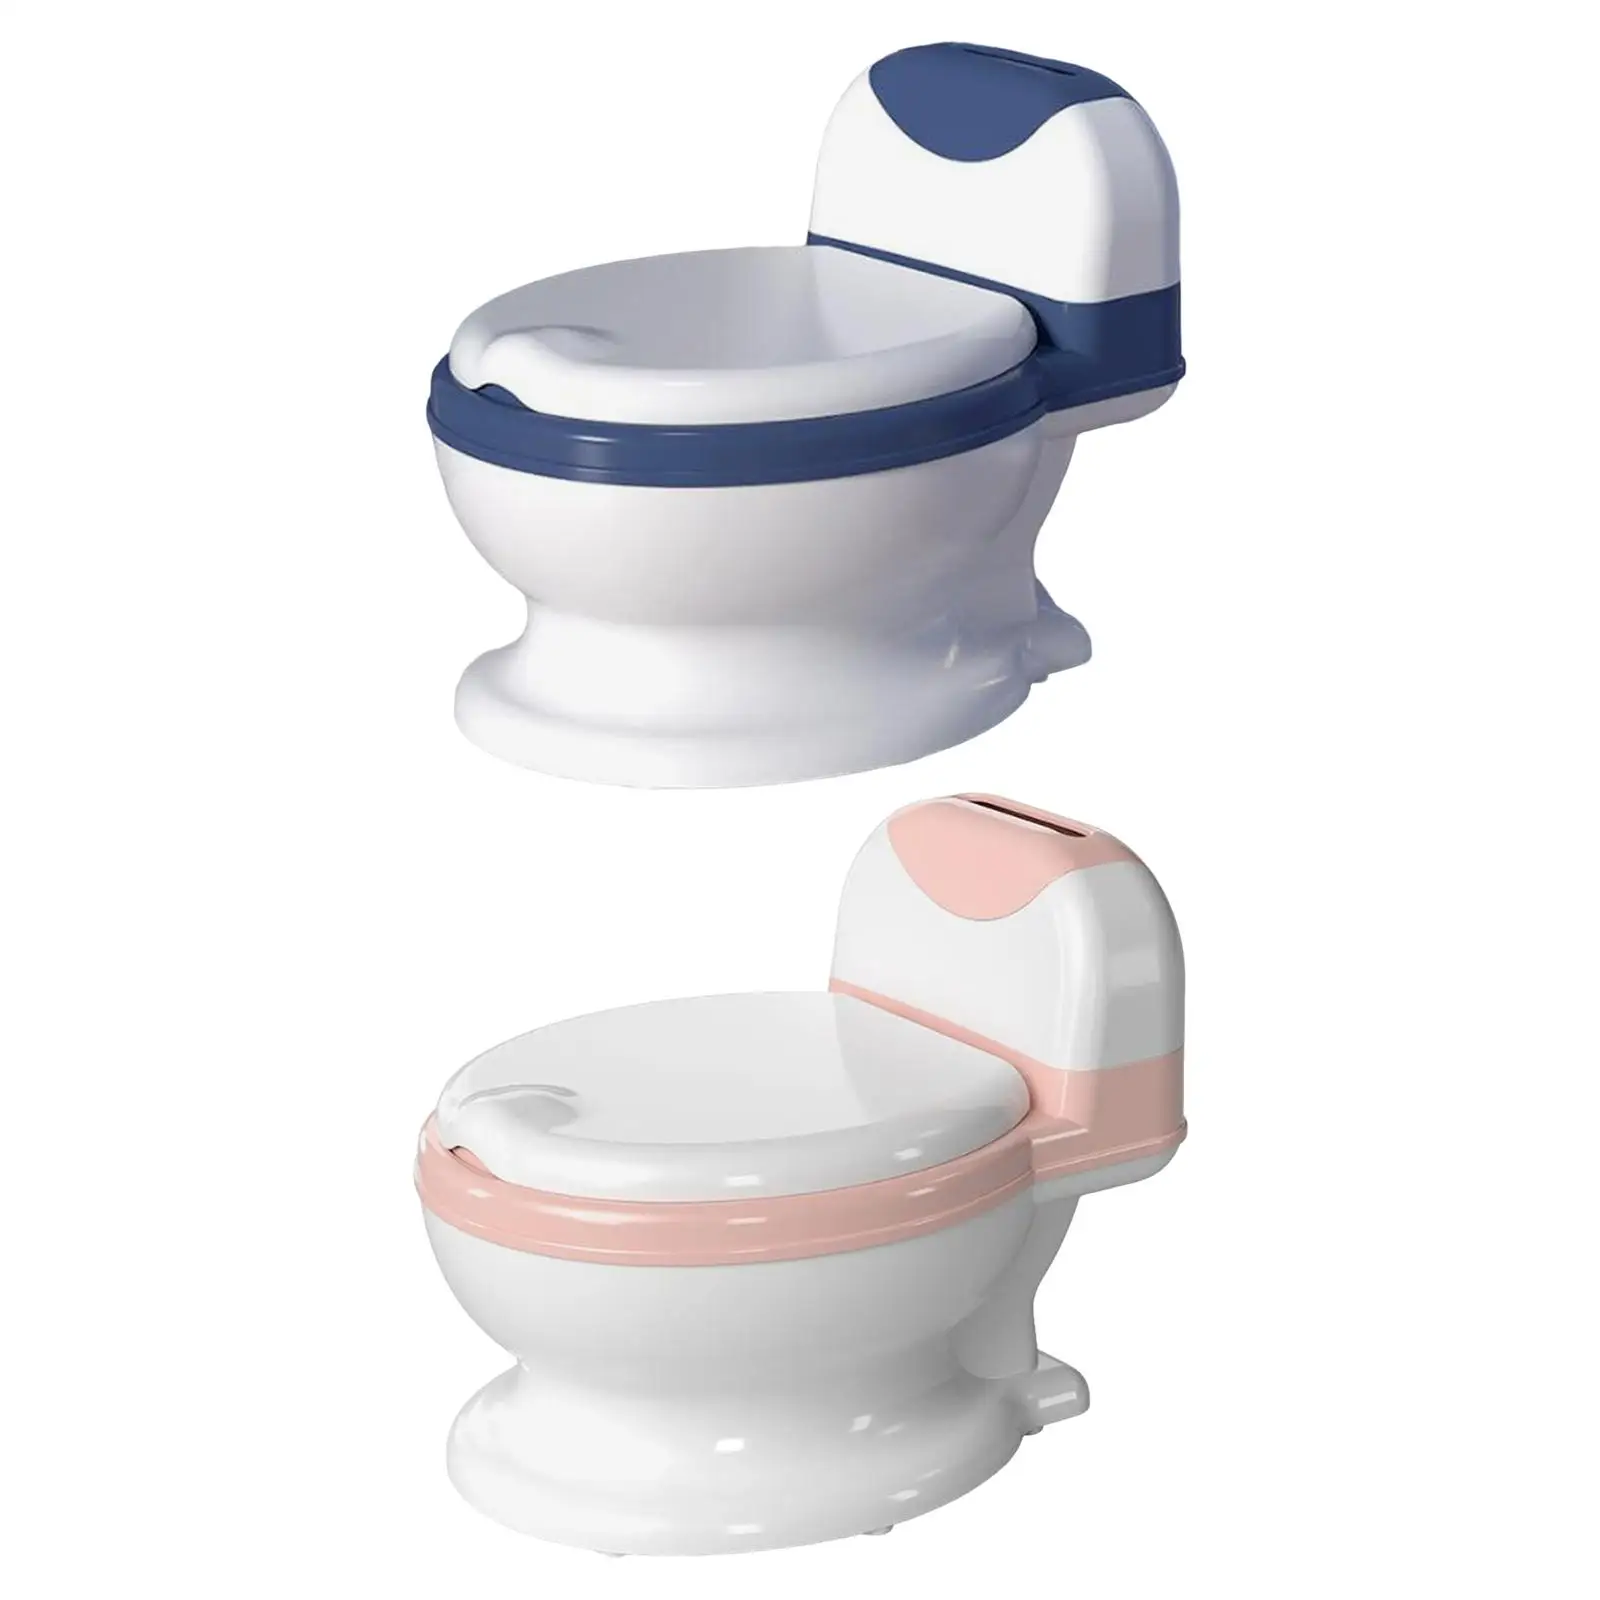 Toilet Training Potty with Wipe Storage Potty Seat Removable Potty Pot for Indoor Outdoor Travel Babies Ages 0-8